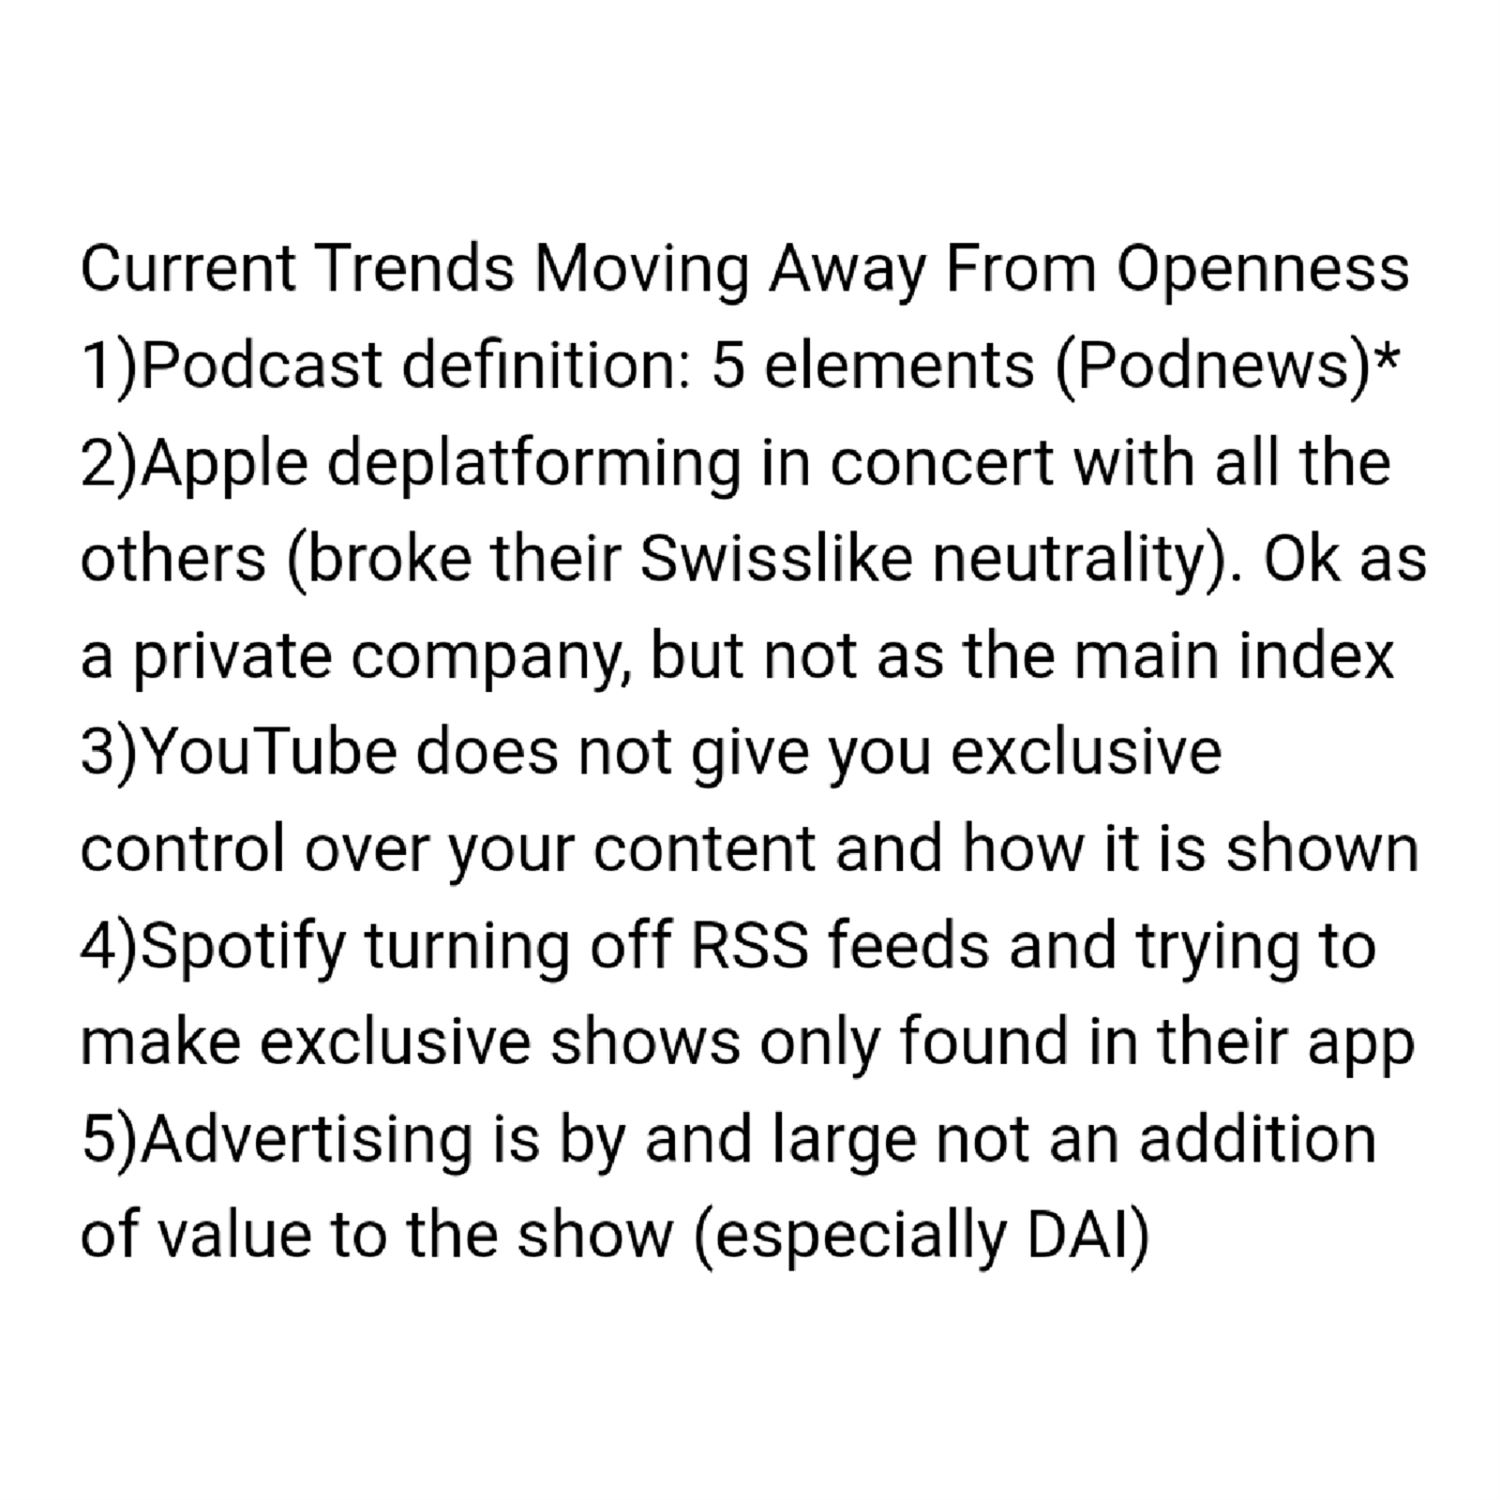 Current trends moving away from openness